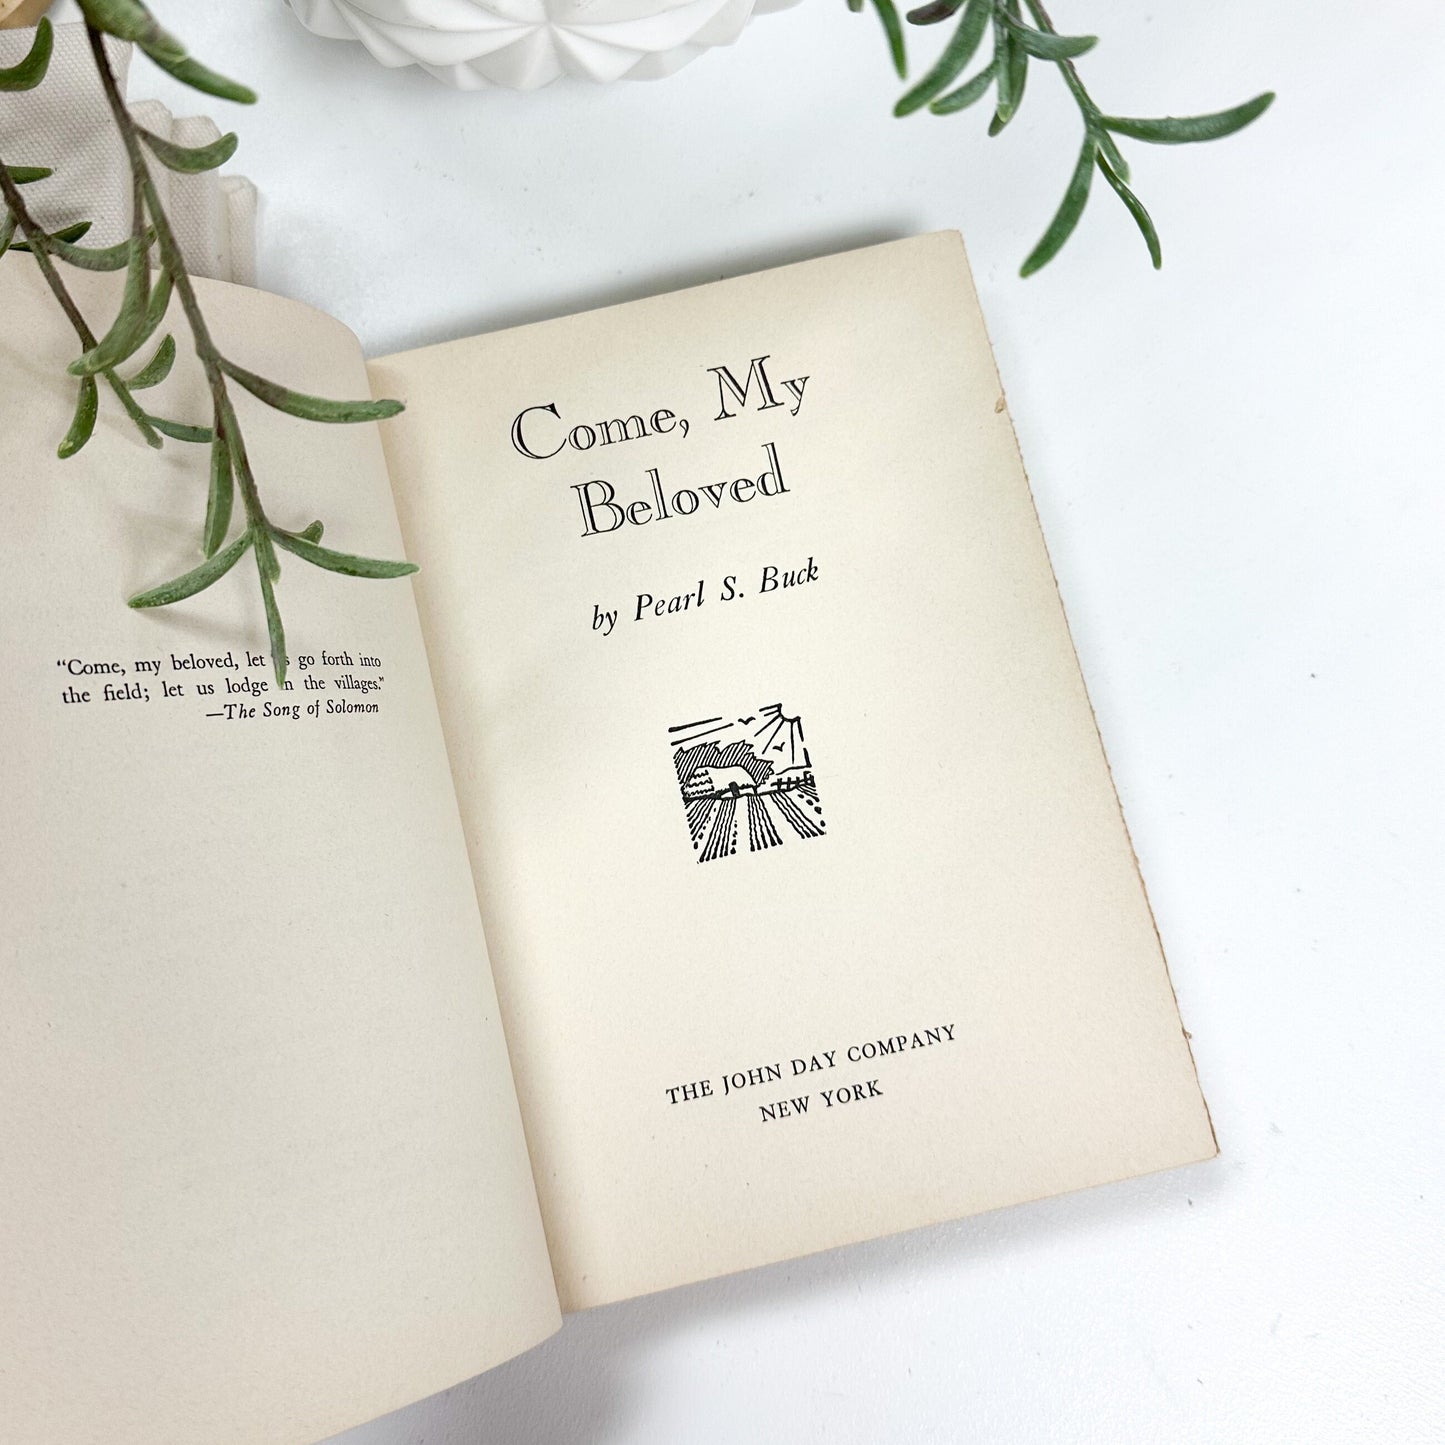 Come, My Beloved by Pearl S. Buck